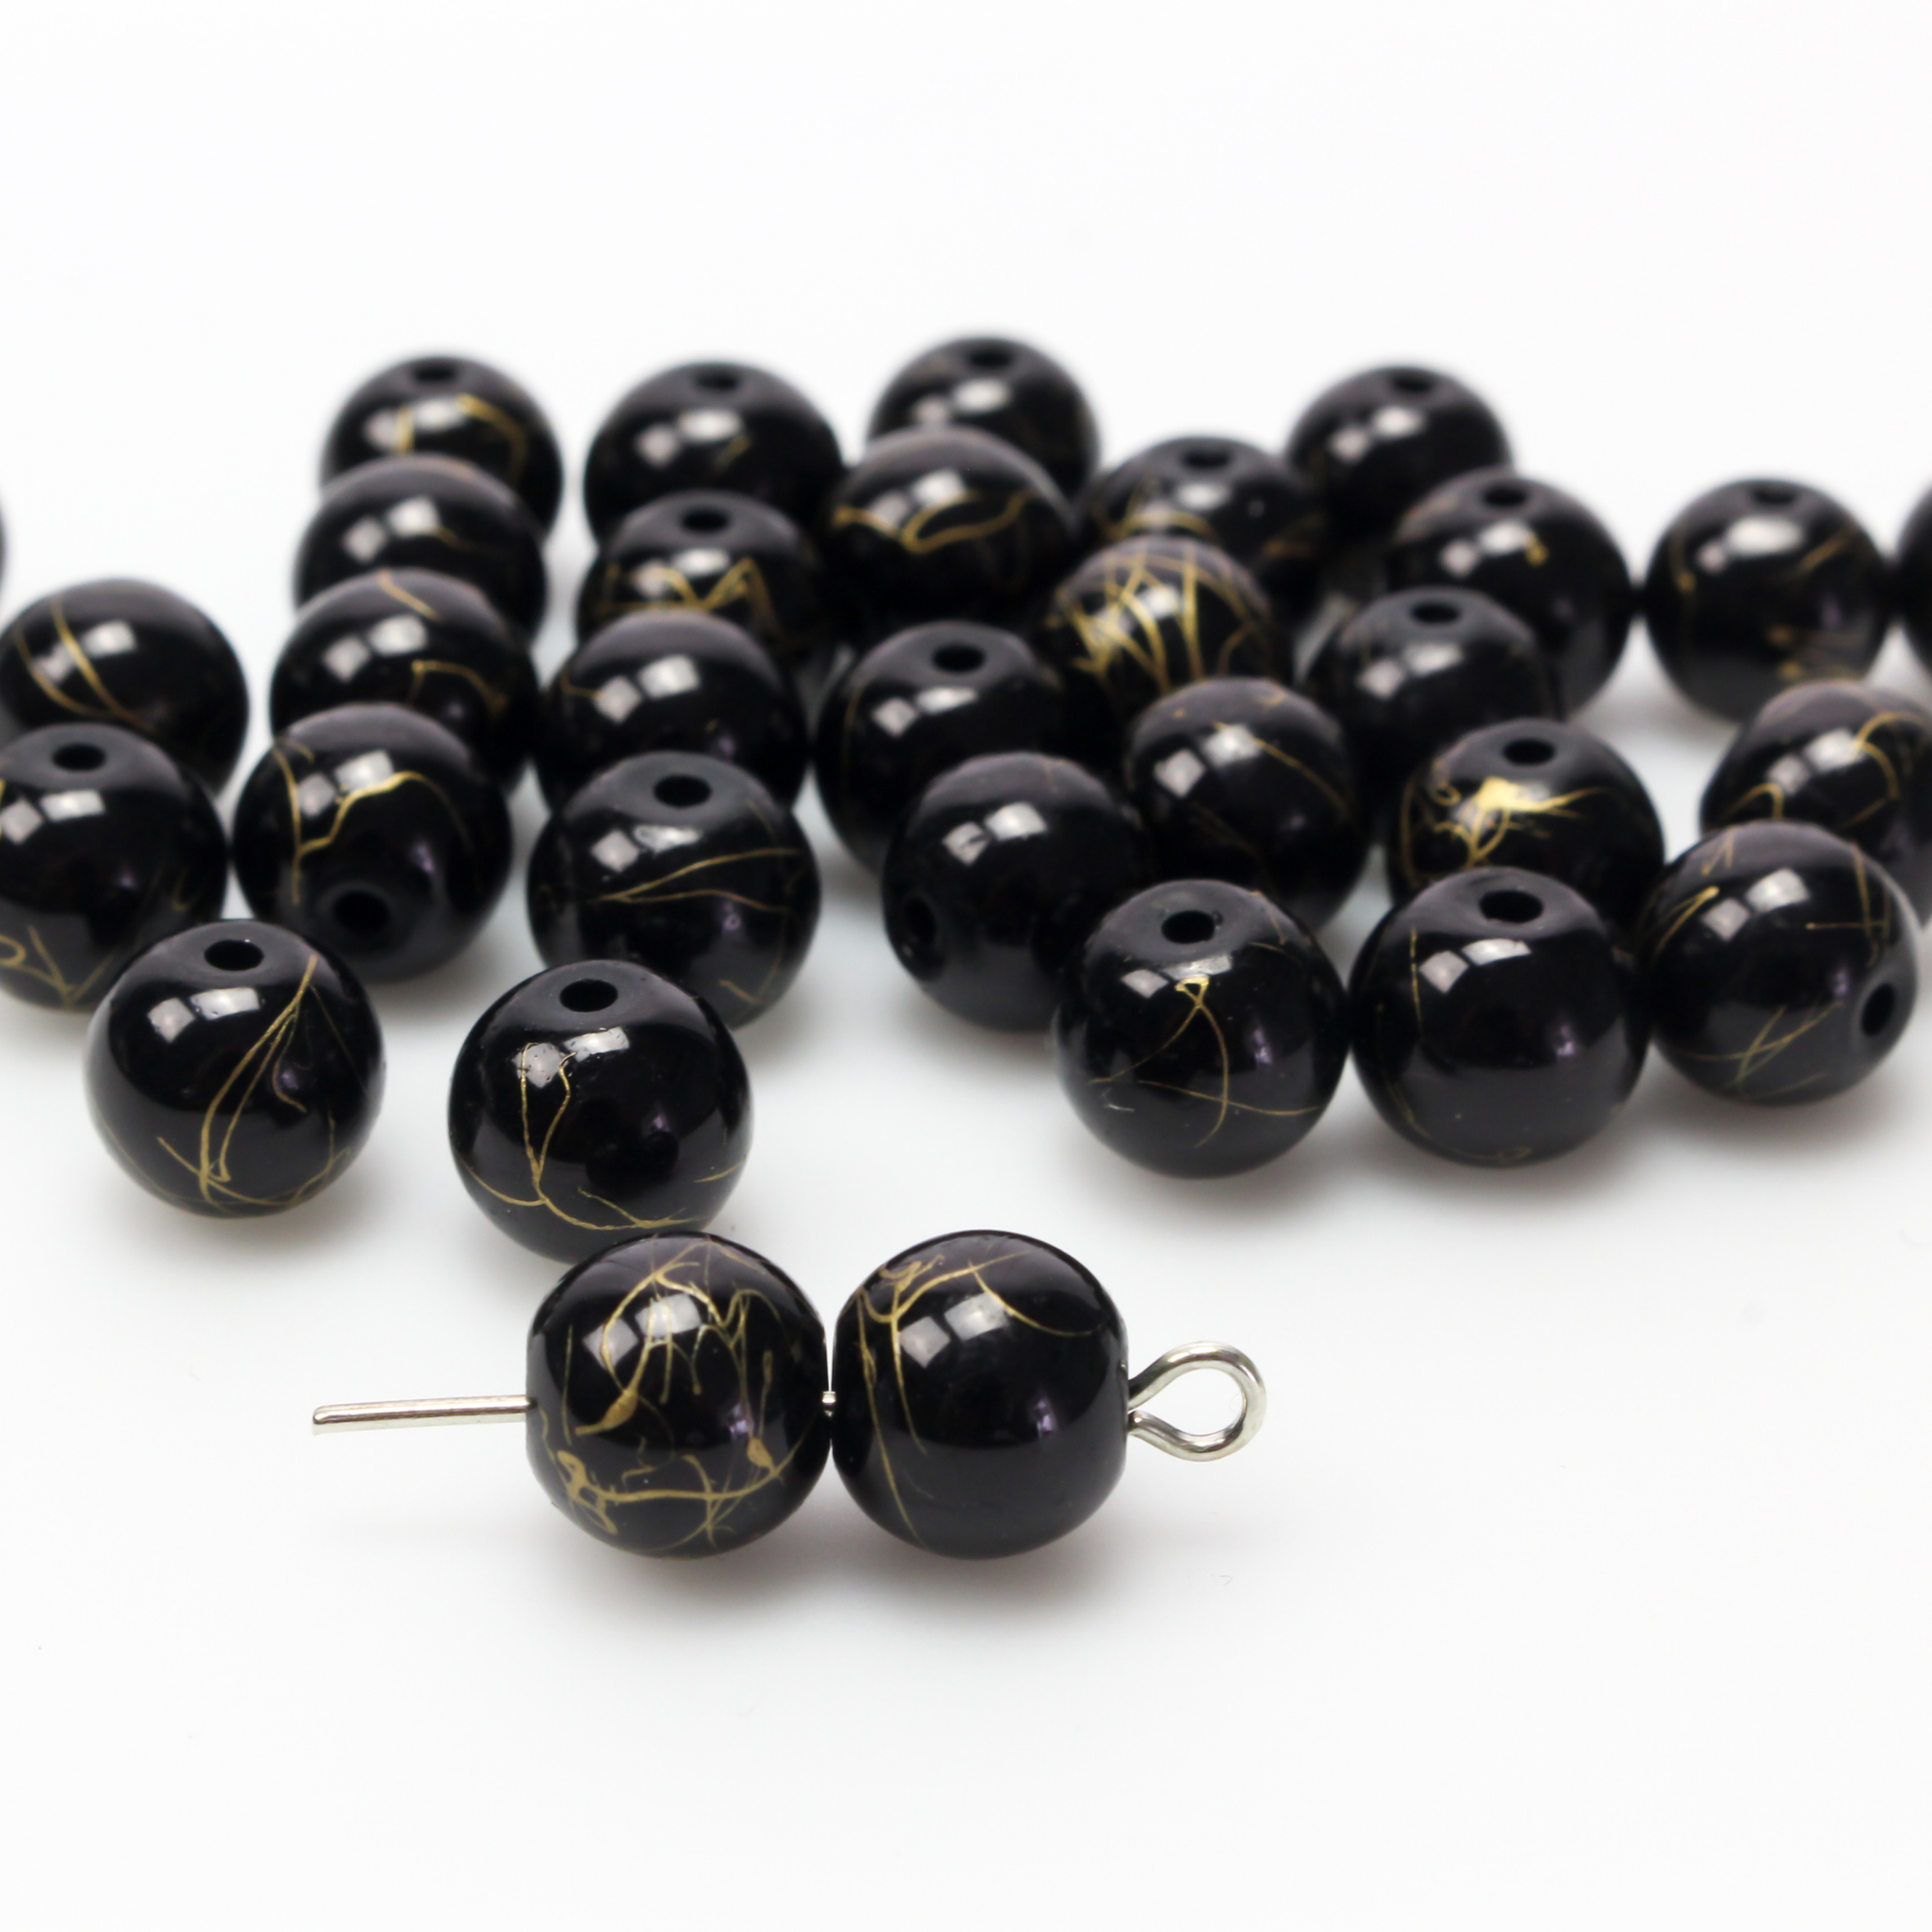 8mm Black glass beads with a gold swirl pattern. Sold in packs of 60 beads, enough to make one five-decade rosary